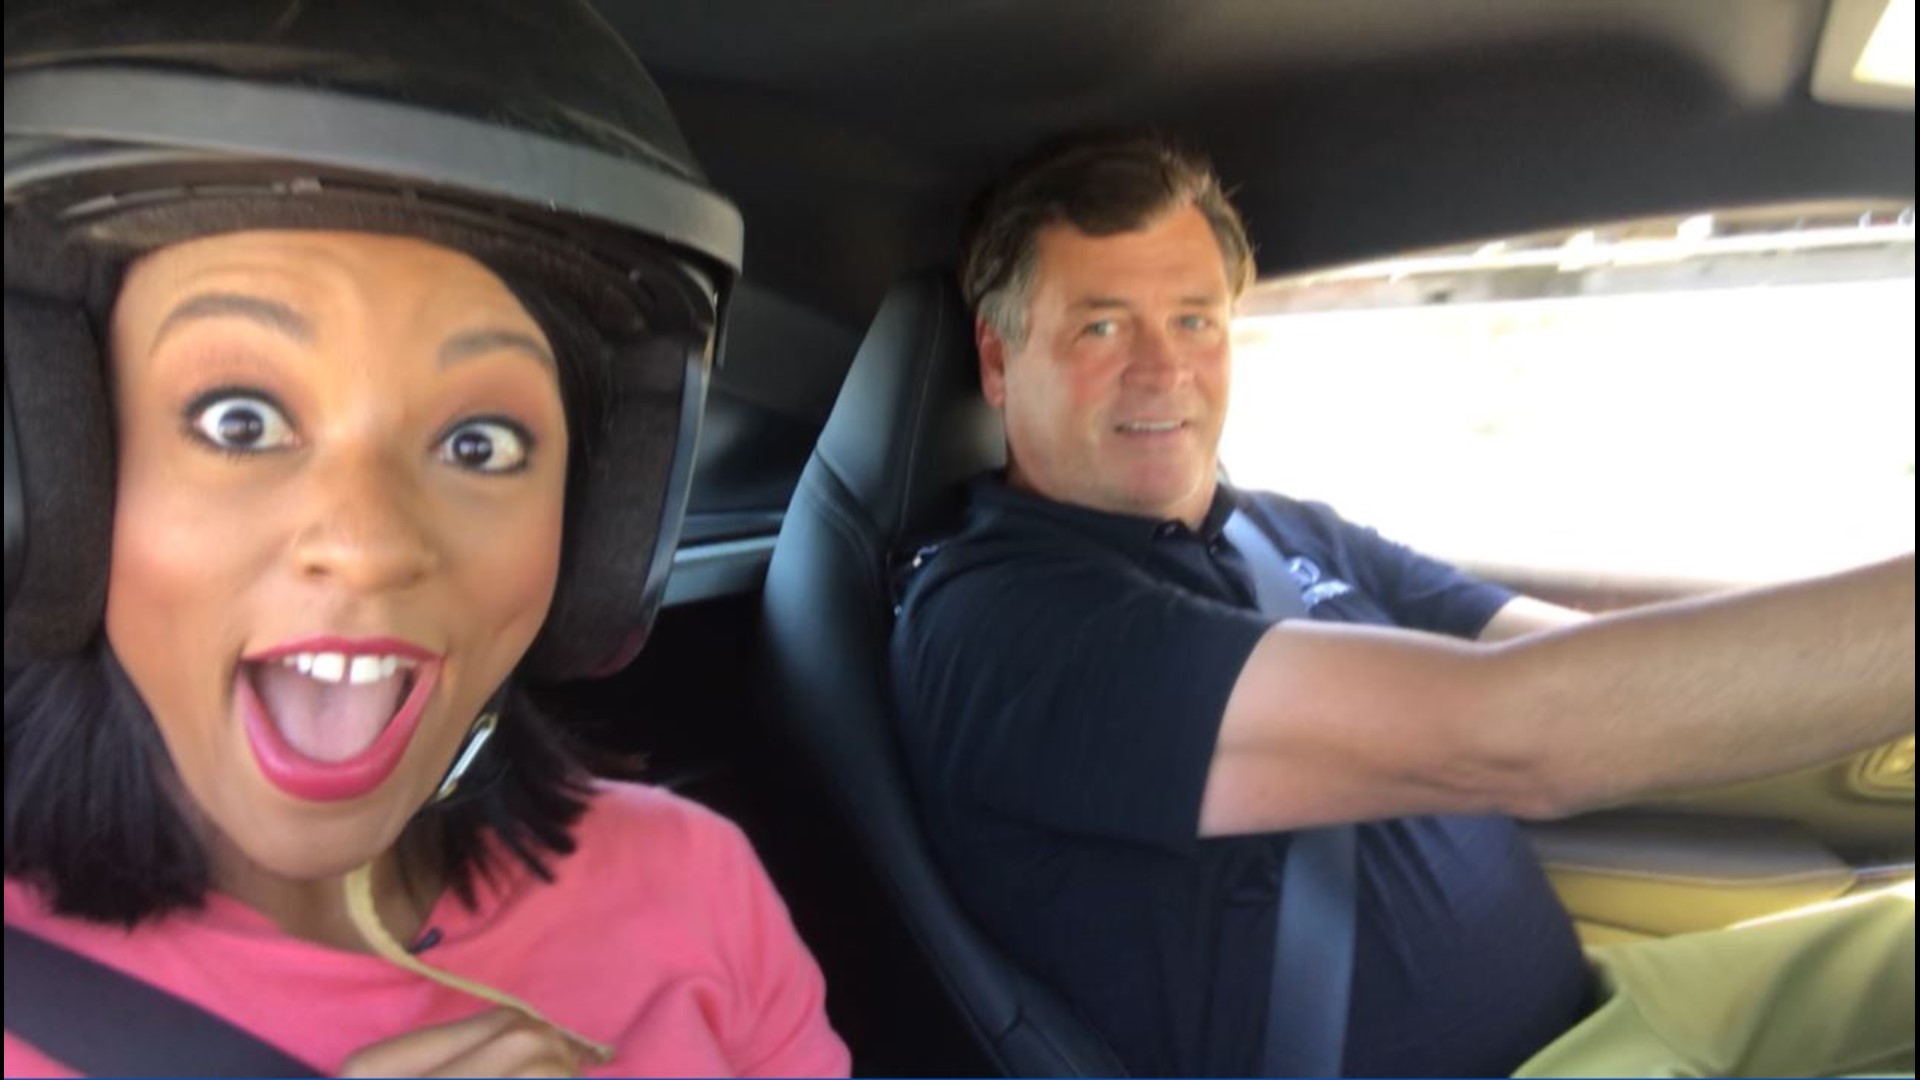 Watch ABC10's Lina Washington go 130 mph with two-time Daytona 500 winner Michael Waltrip on the 12-turn road course at Sonoma Raceway